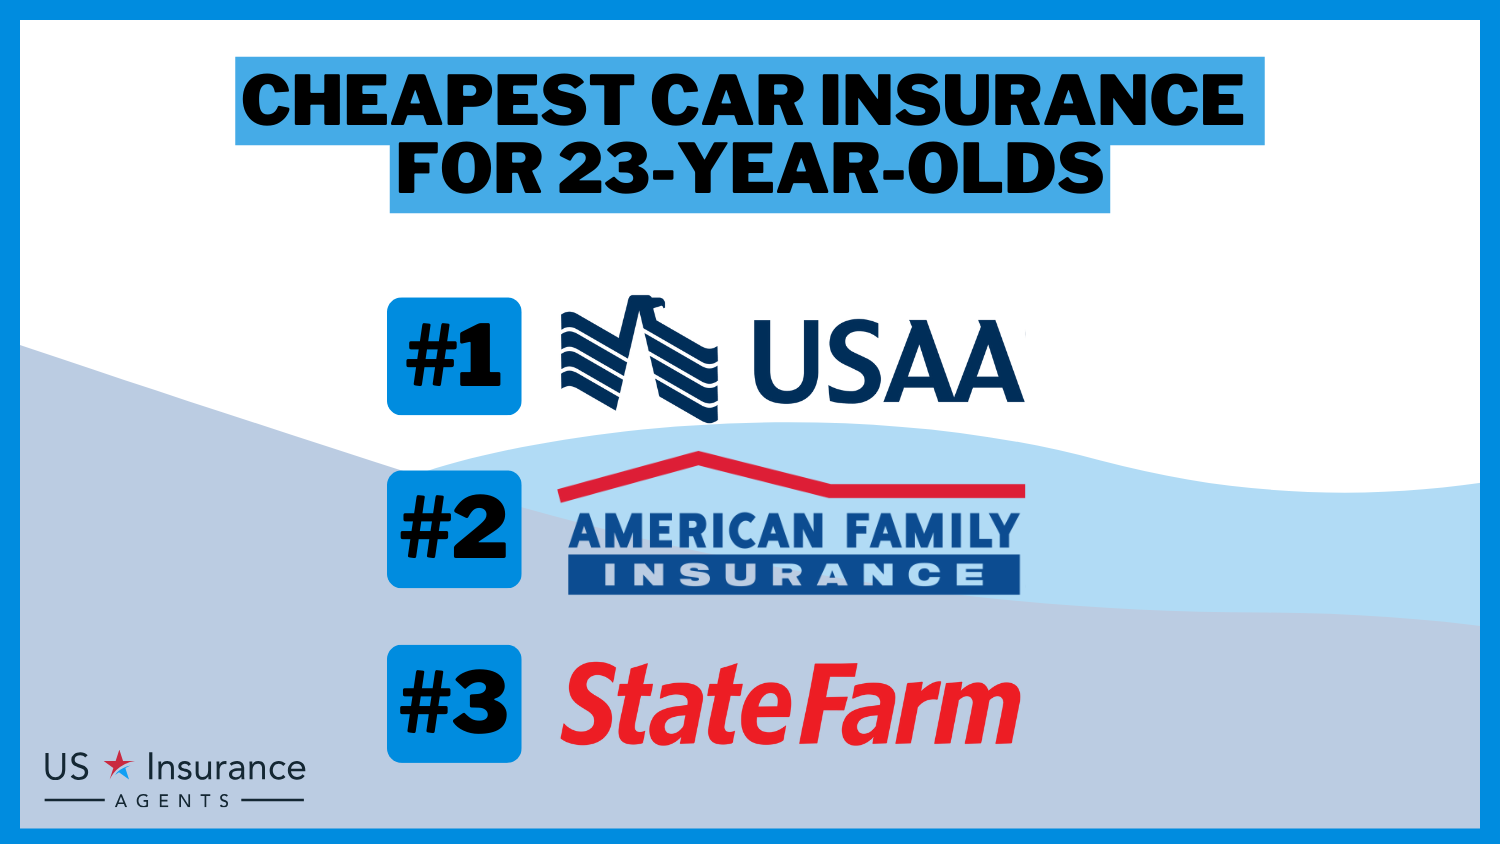 Cheapest Car Insurance for 23-Year-Olds: USAA, American Family, State Farm